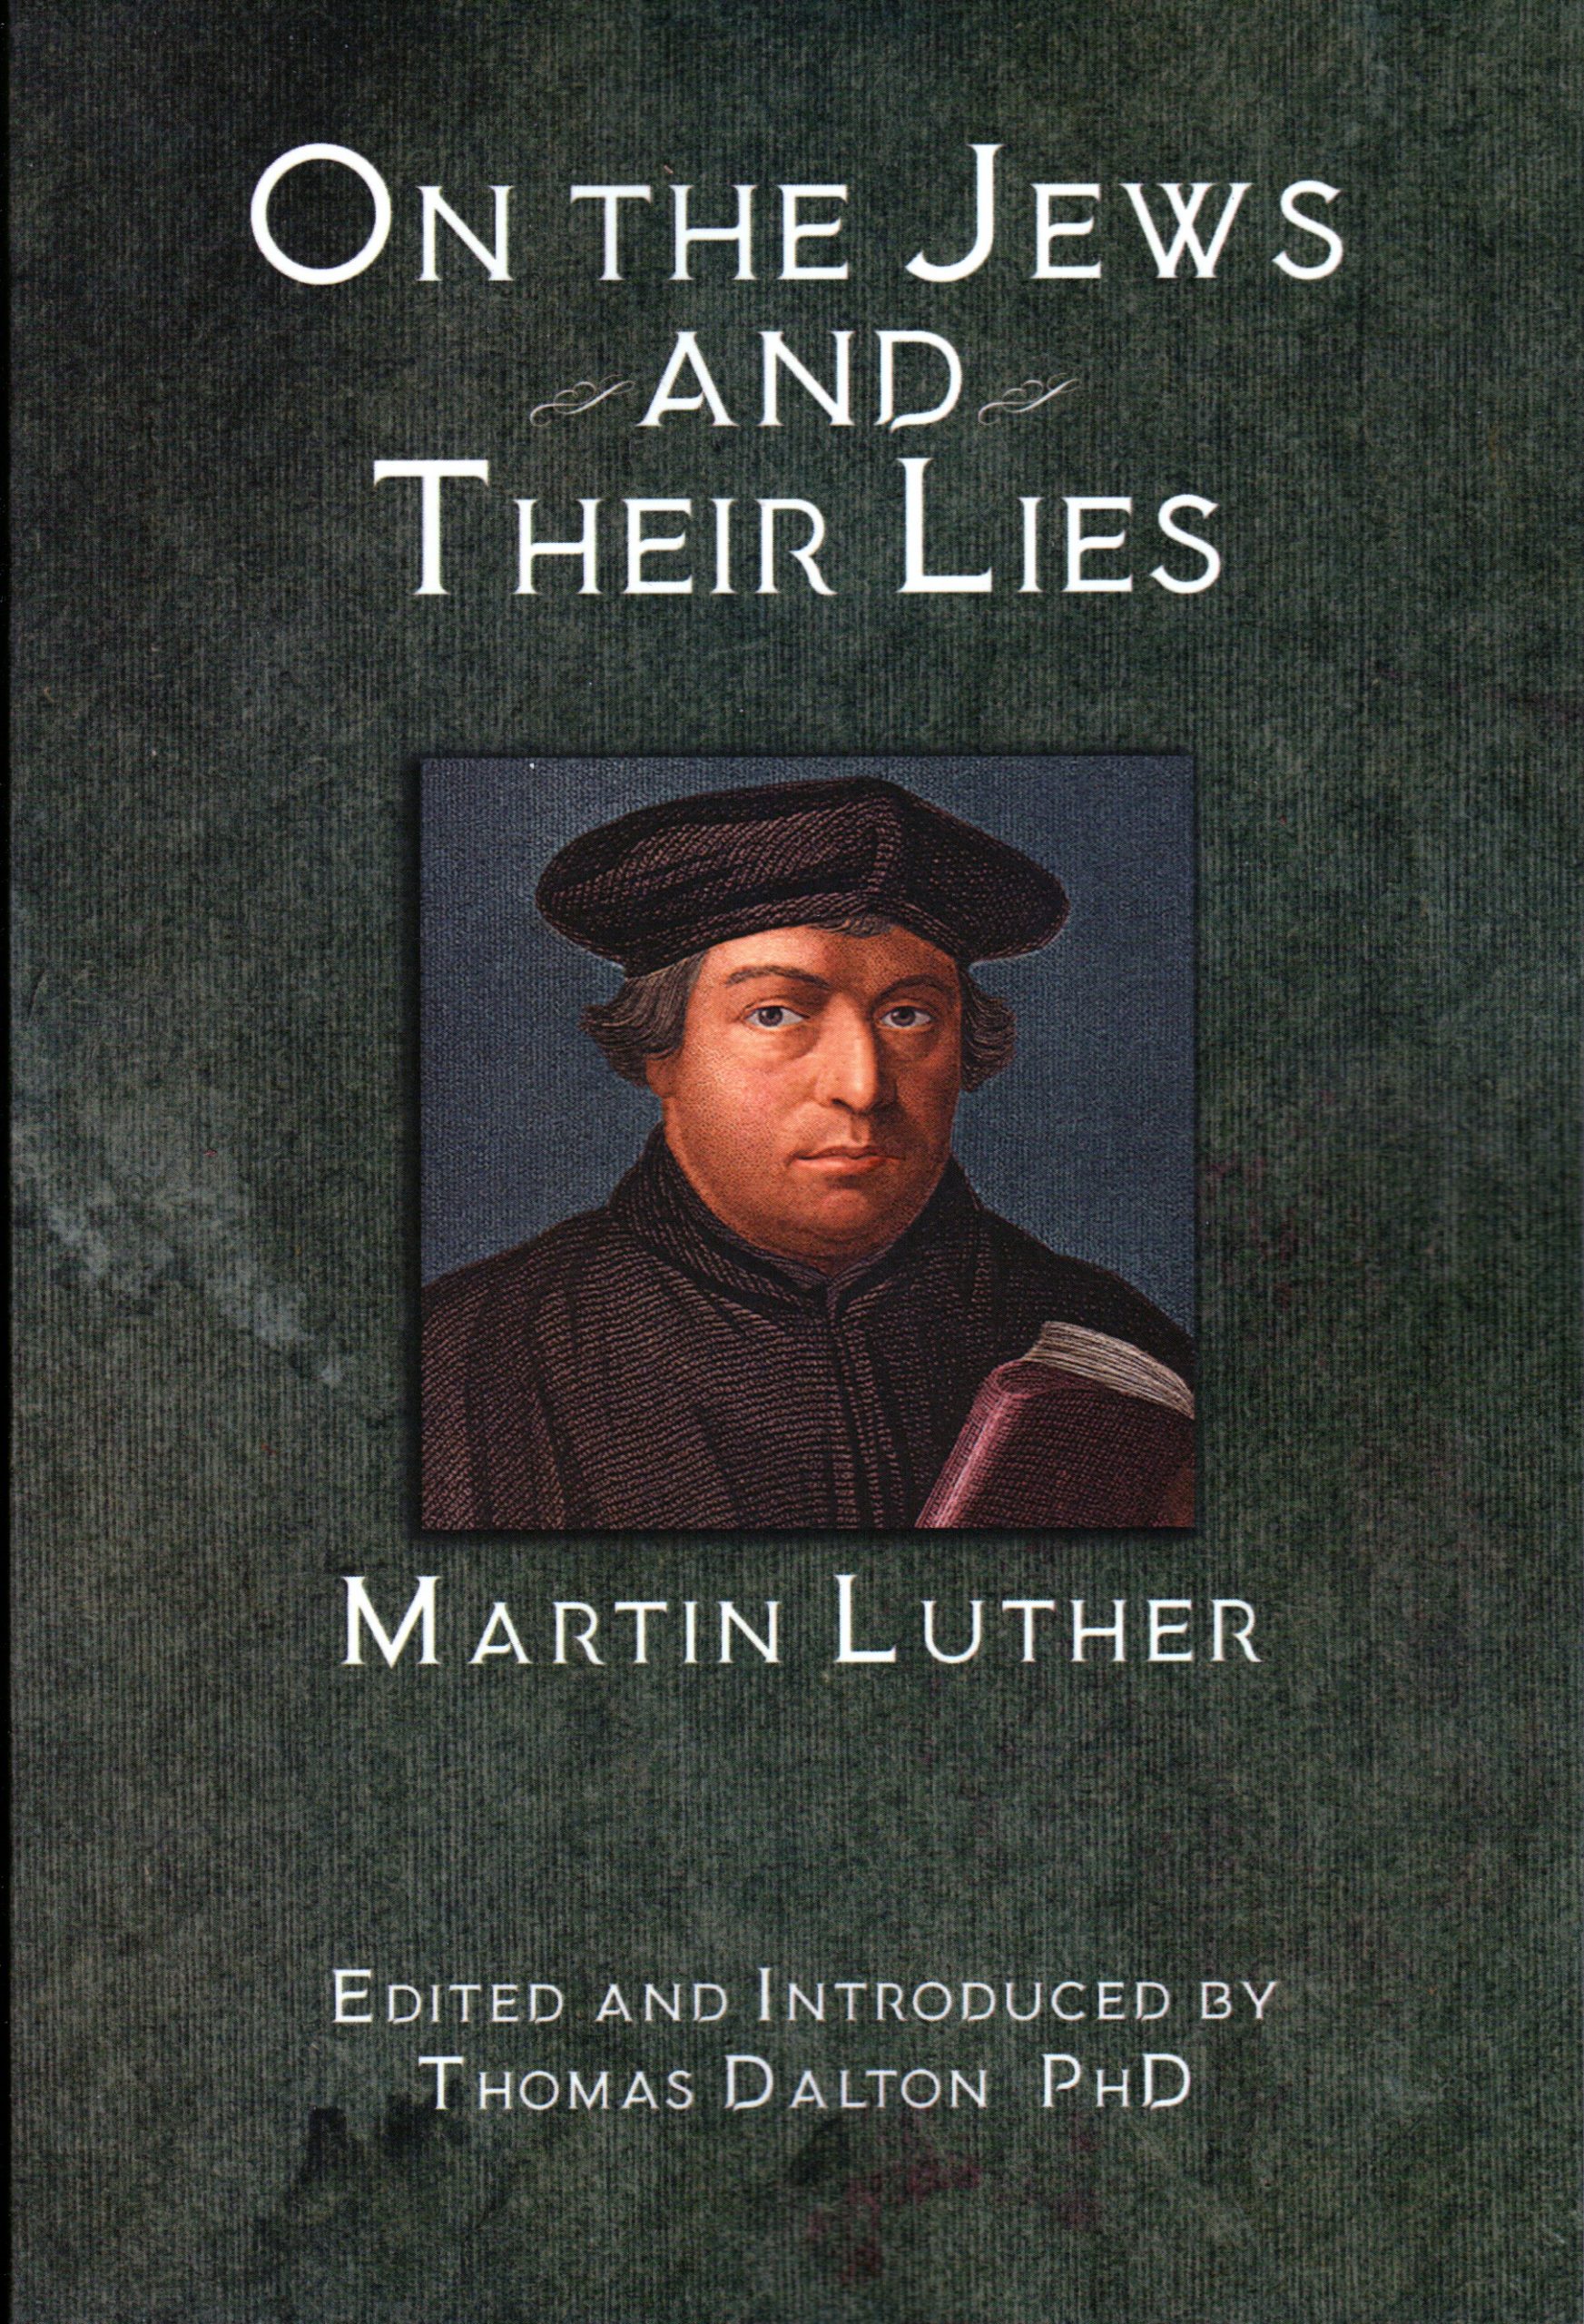 "the Jews & Their Lies" by Dr. Martin Luther